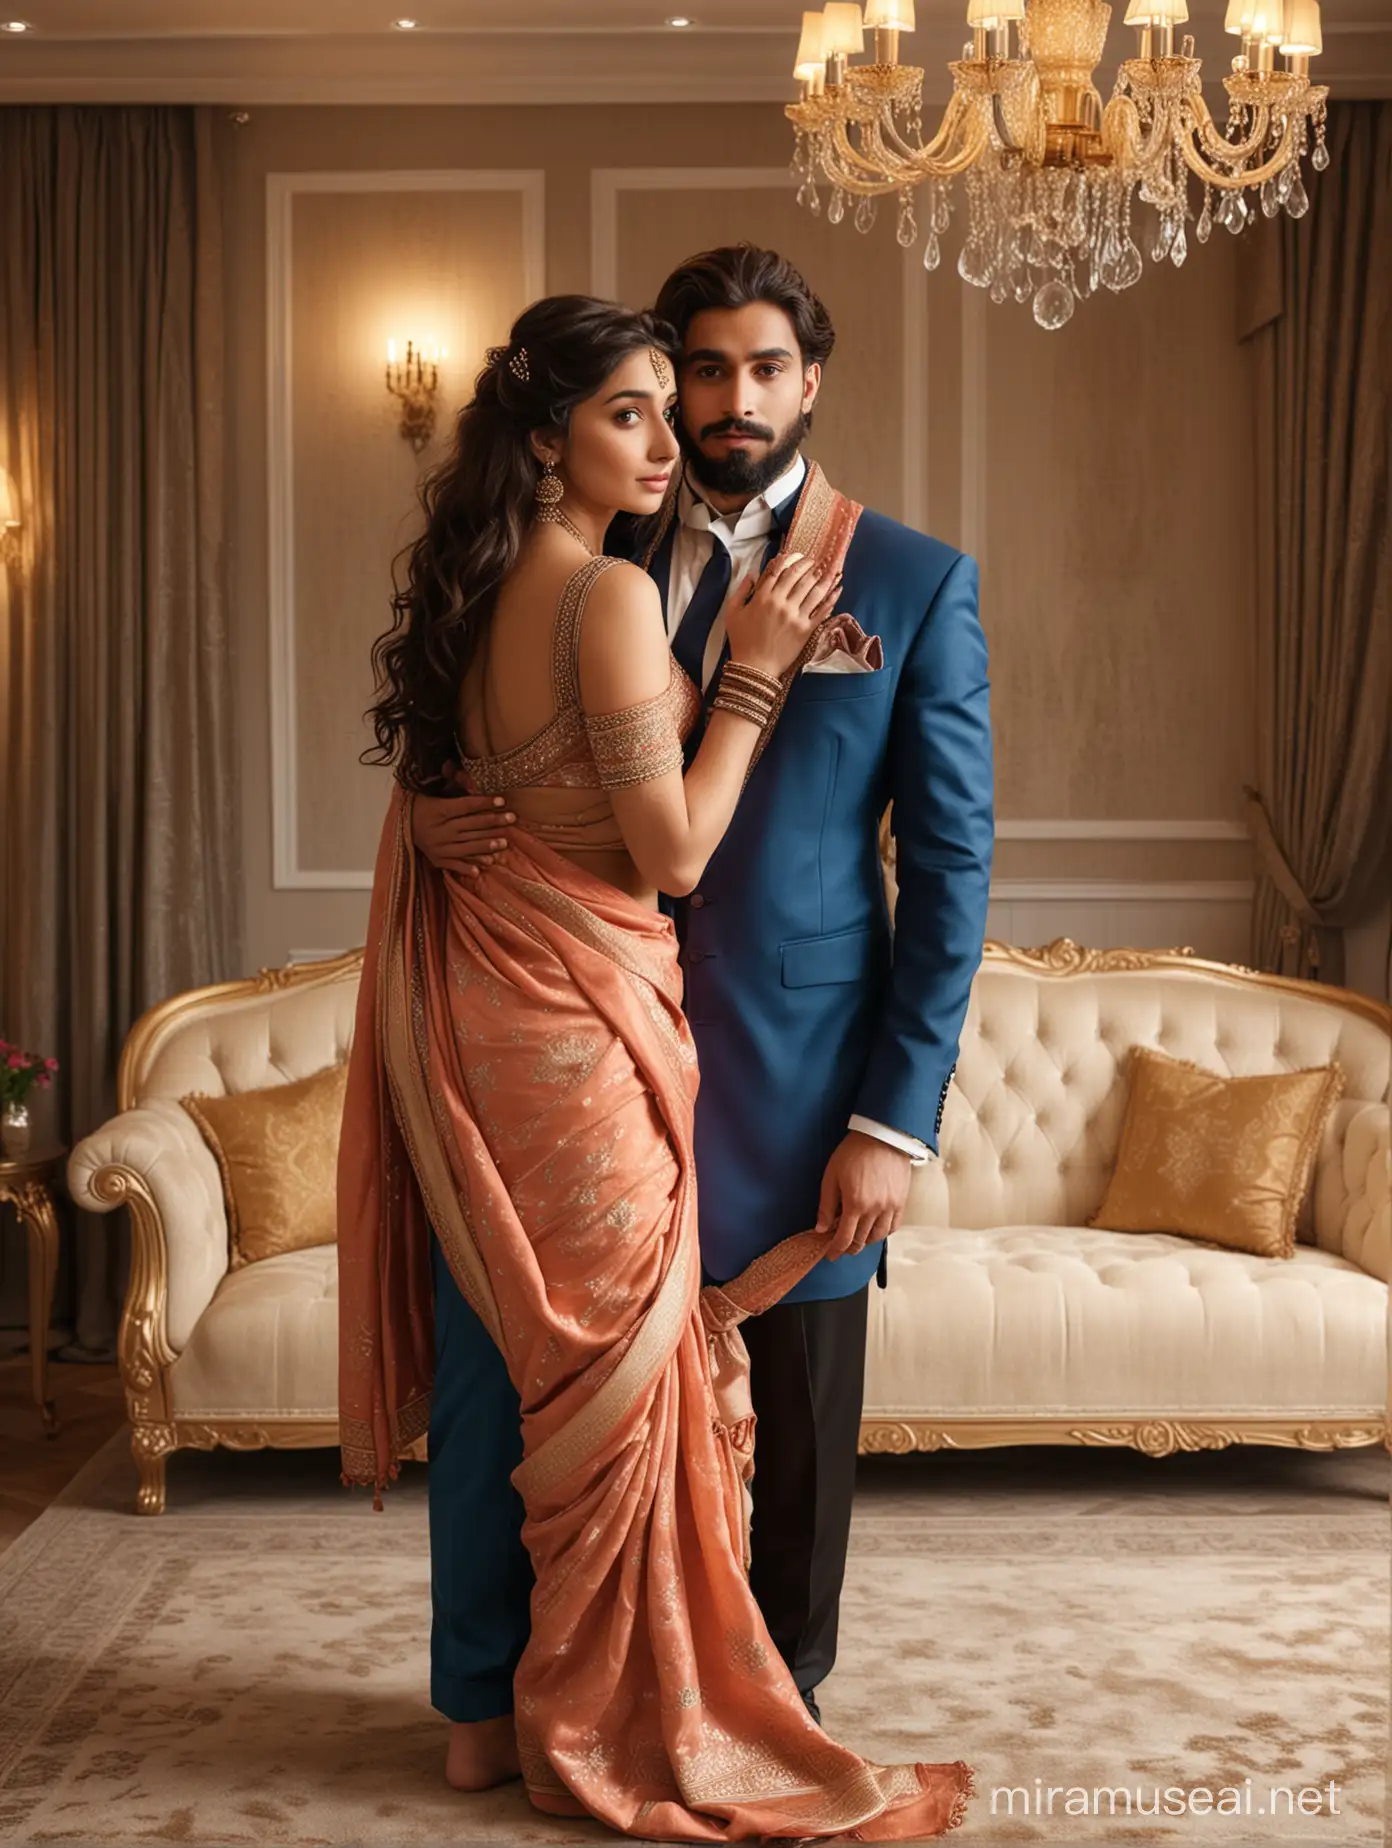 full body view  of most beautiful european couple as most beautiful indian couple, most beautiful girl in elegant bold color saree and long curly hairs, hairs tied  up with hair style stylishly, big wide black  eyes, full face, makeup, TOPLESS,  girl embracing boy  FROM BEHIND with emotion and possessive feeling, pressing face to BACK OF SHOULDER of boy, GIRL CRYING emotionally with longing feeling, innocence and ecstasy,  BOY with stylish beard, perfect hair cut, formals, photo realistic, 4k.
background, spacious modern elite photo room, with luxury sofa set, cream color carpet, elegant interior designs, vintage lamps, romantic reunion ambience, photorealistic, vibrant colors, intricate details, 8k.